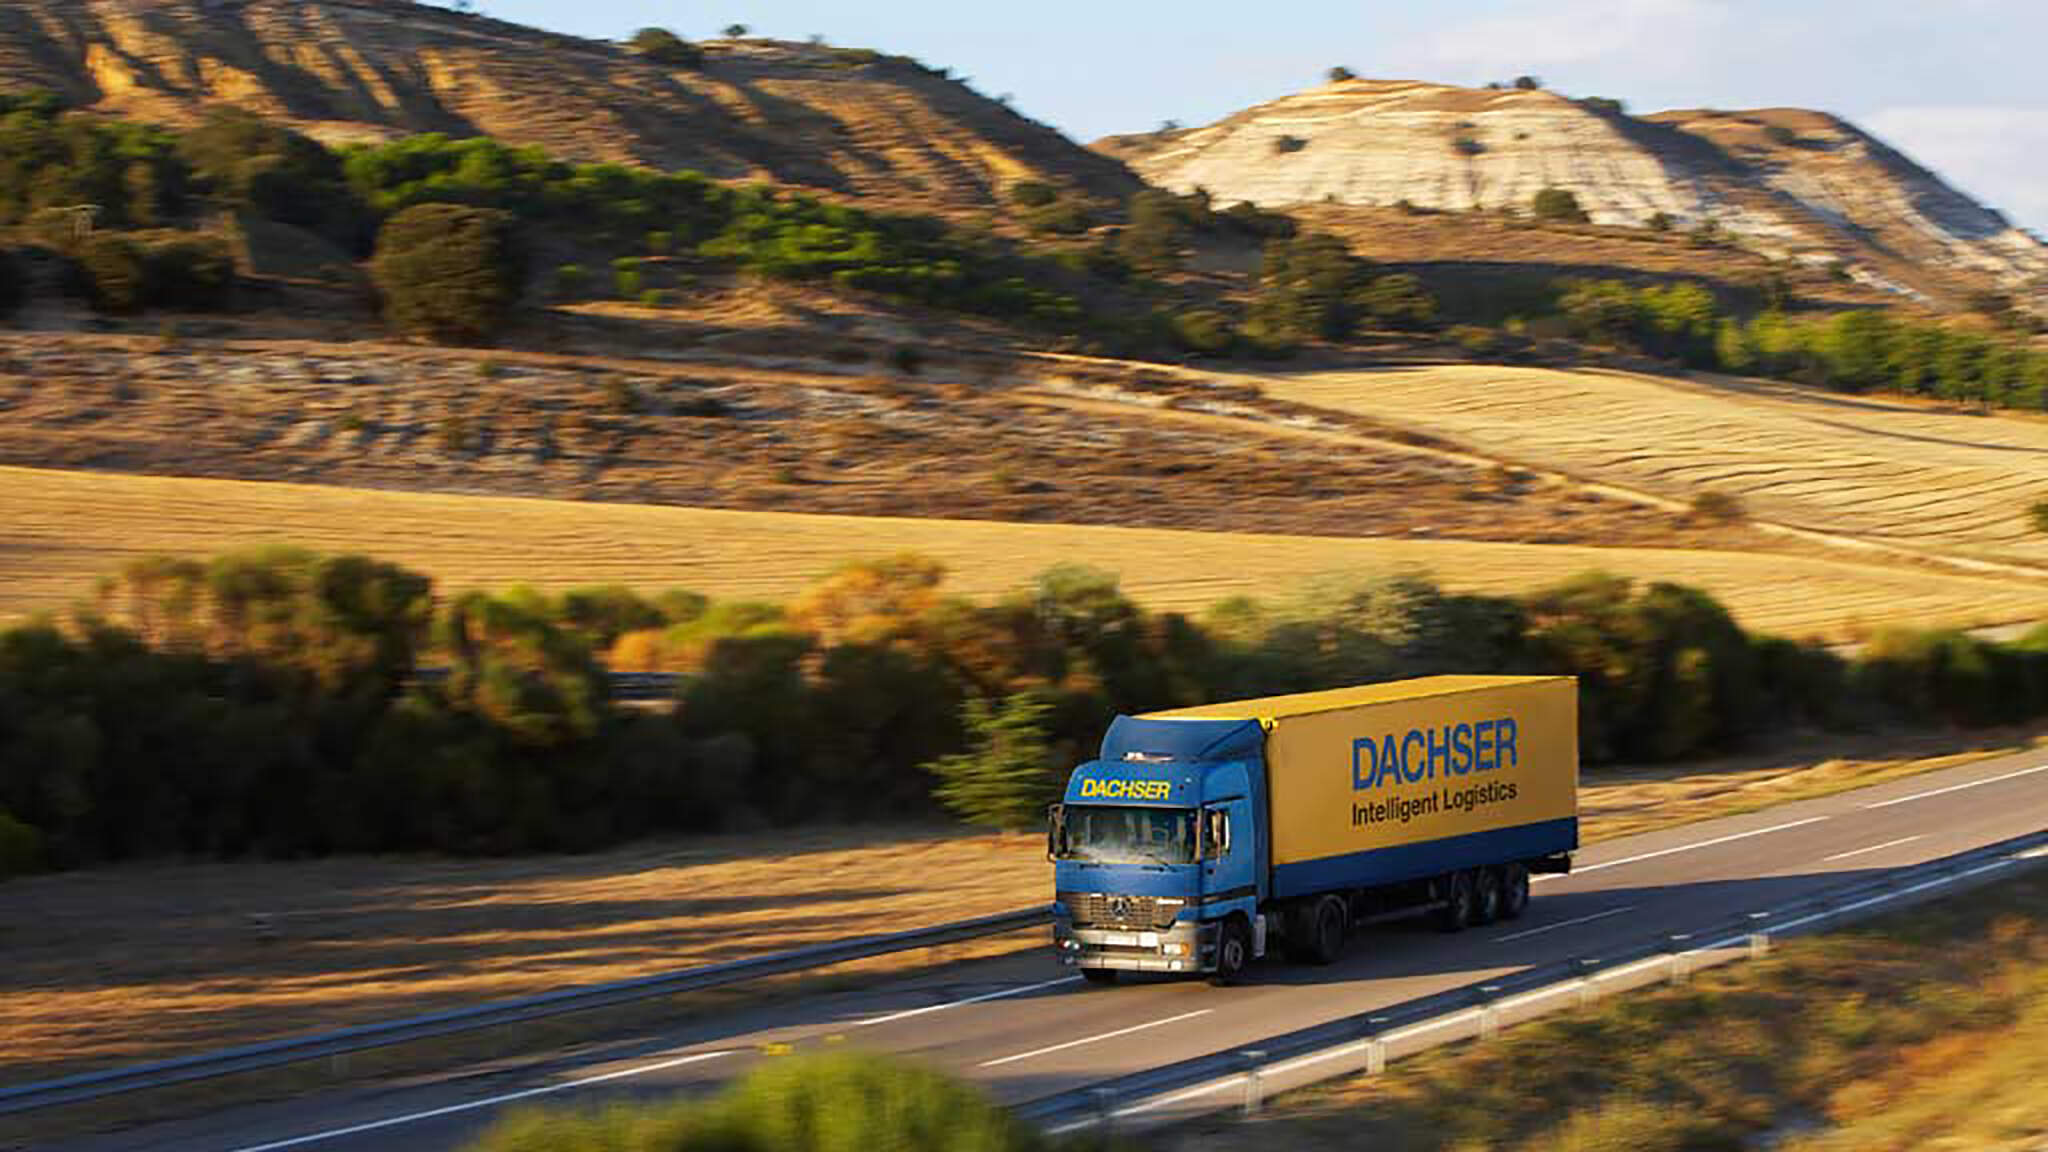 Dachser has long-established weekly services to and from Tunisia and Morocco with its own offices and warehouses.